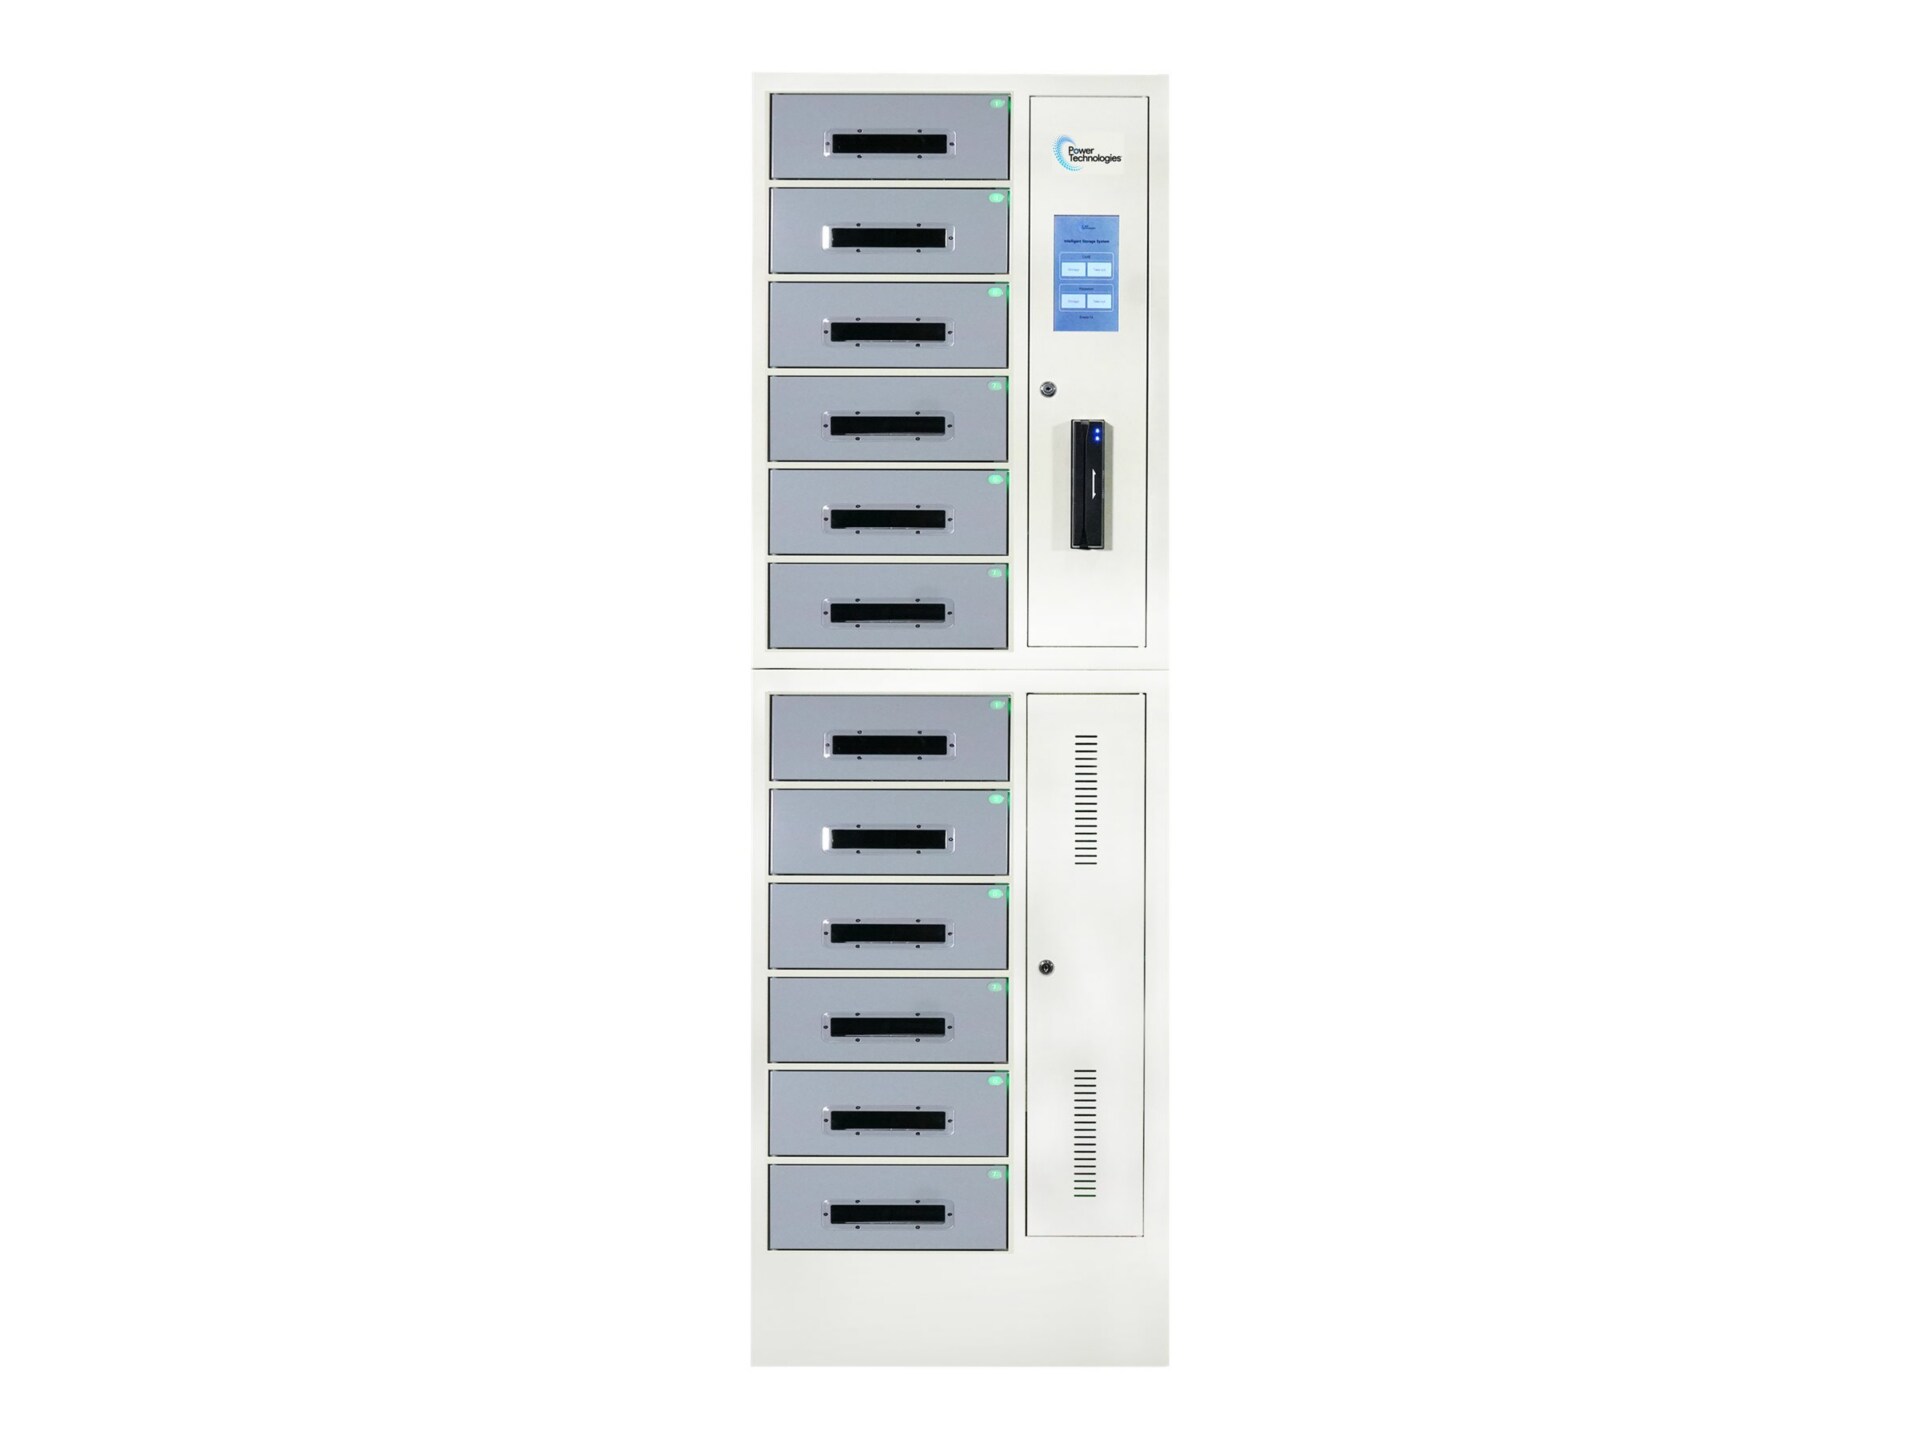 Anywhere Cart AC-LOCKER-12-RFID - cabinet unit - for 12 tablets / notebooks